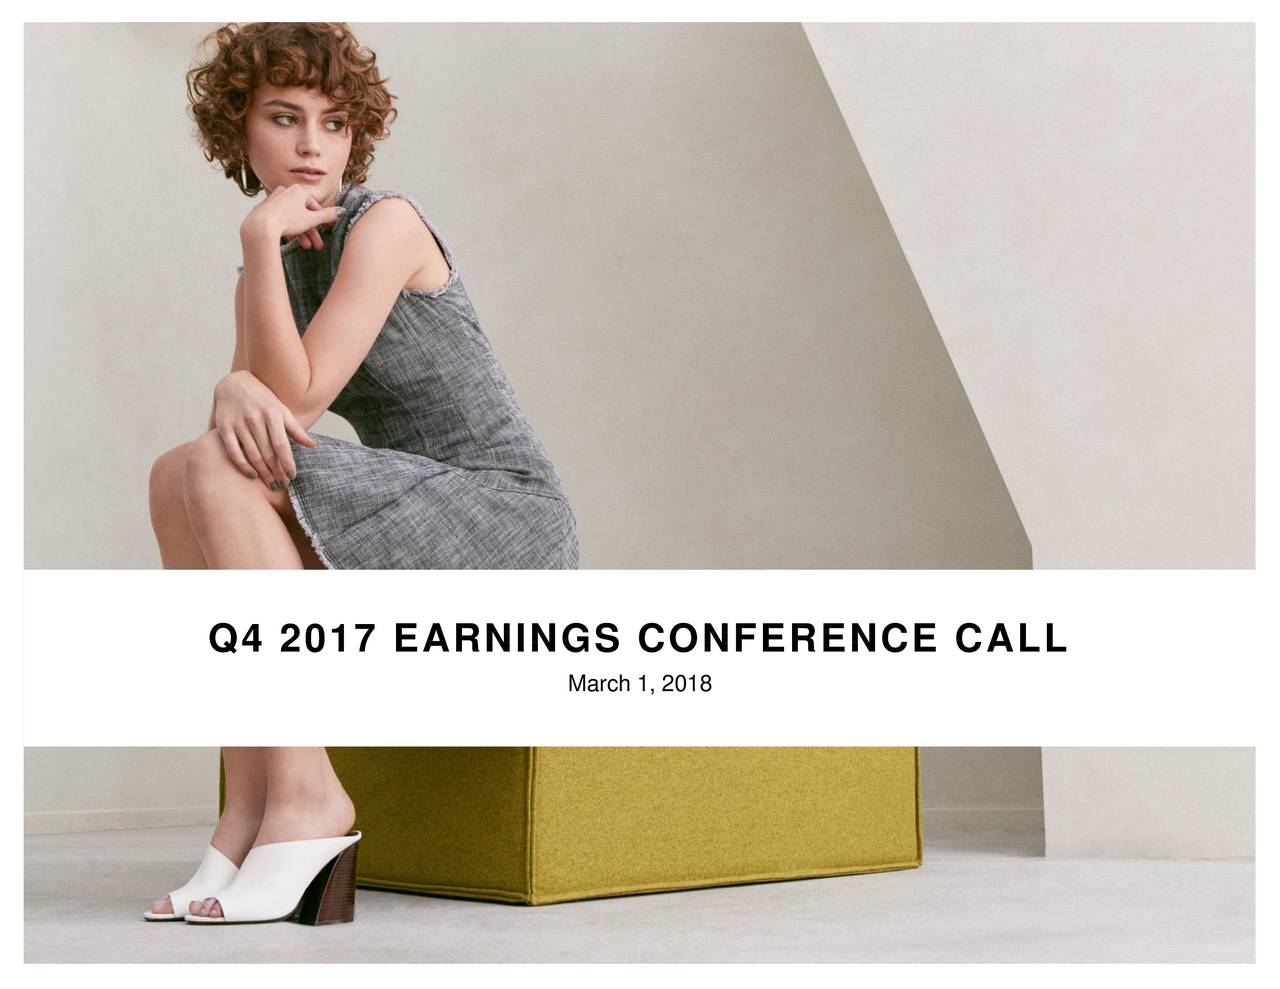 Q4 2017 EARNINGS CONFERENCE CALL